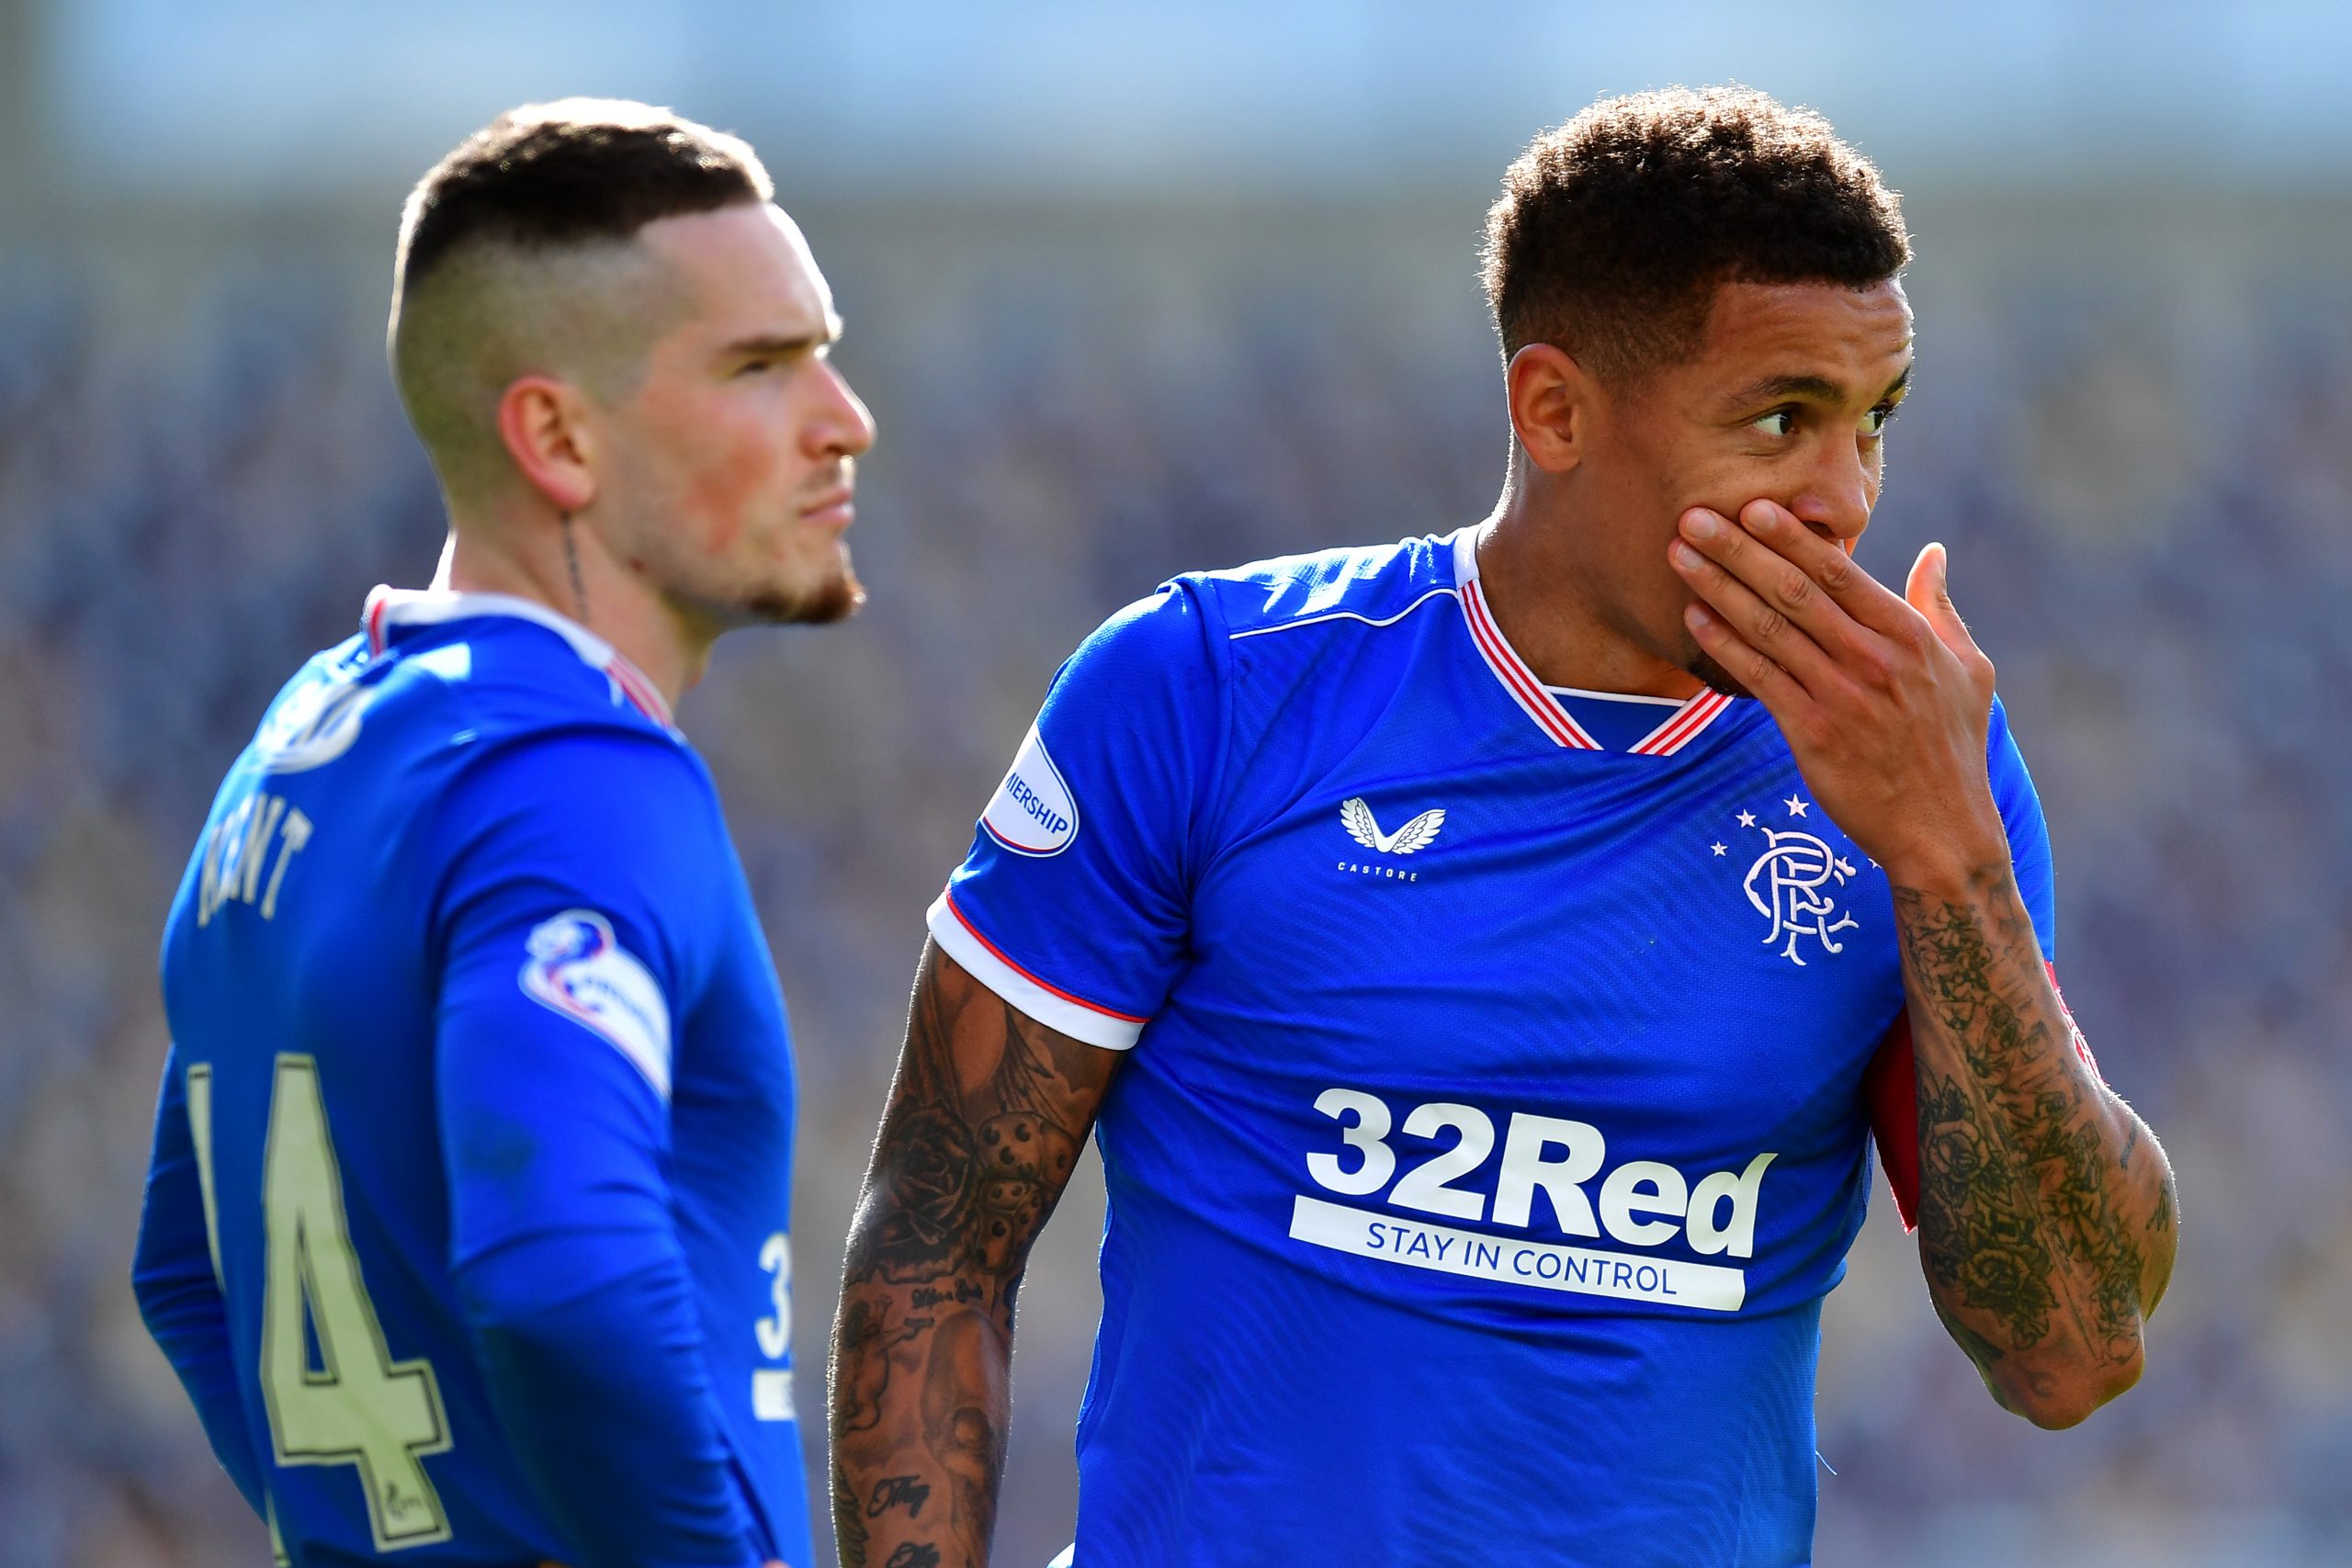 Picking Out 3 Rangers Players Who Stand Out Ahead Of The Rest - Kent and Tavernier